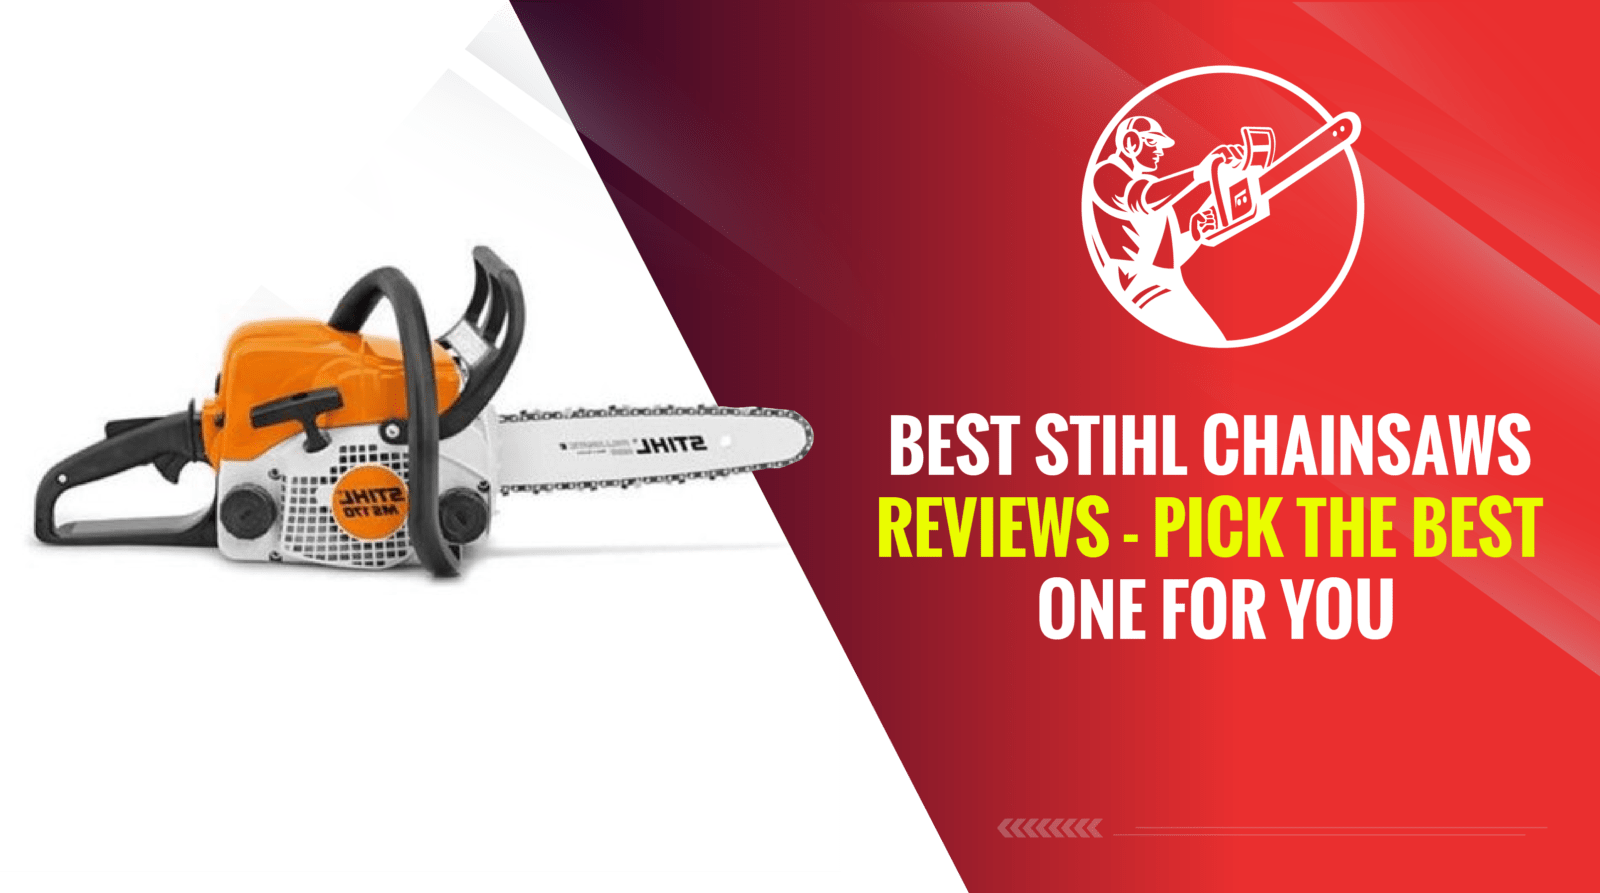 Best Stihl Chainsaws Reviews 2023 – Pick the Best One for you